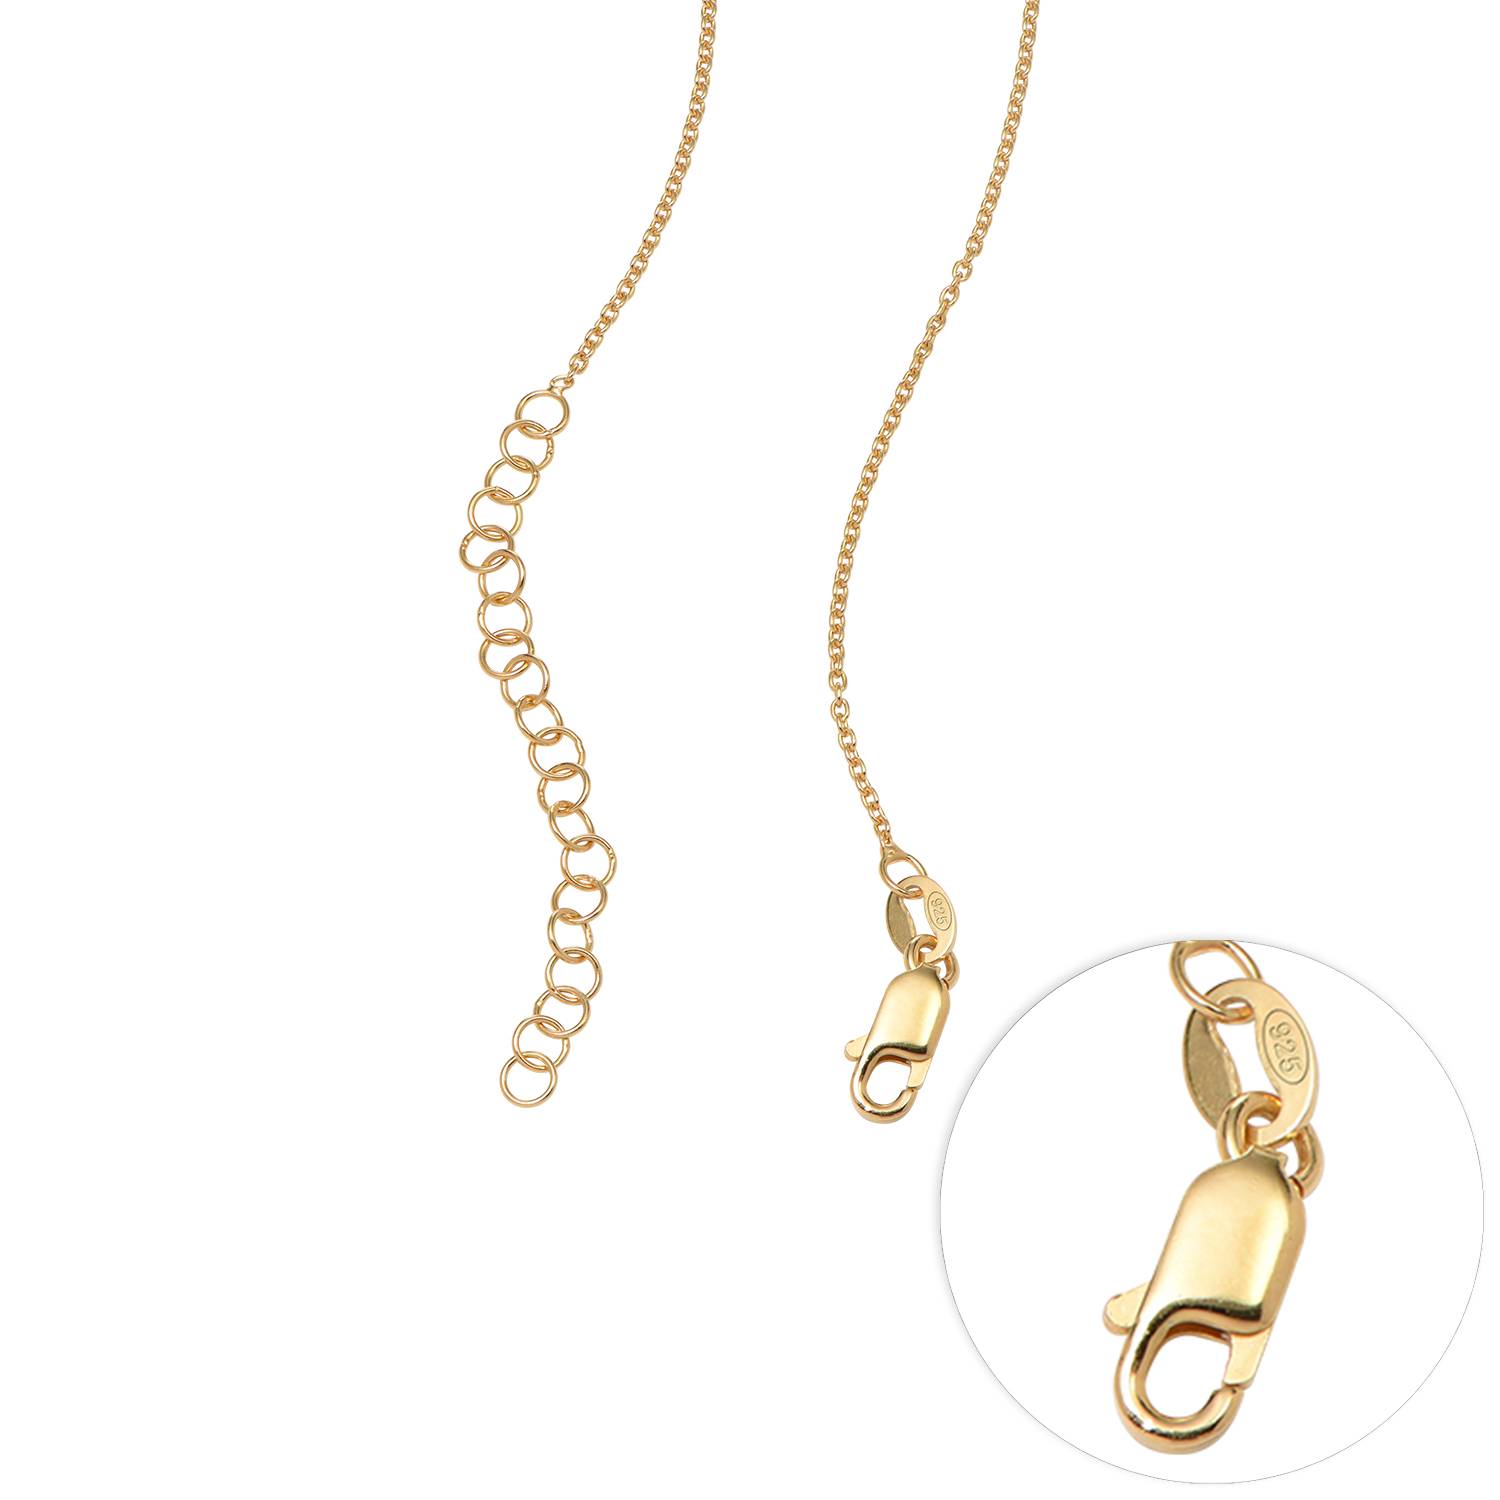 Claire Interlocking Hearts Necklace in Gold Vermeil with Diamonds-3 product photo